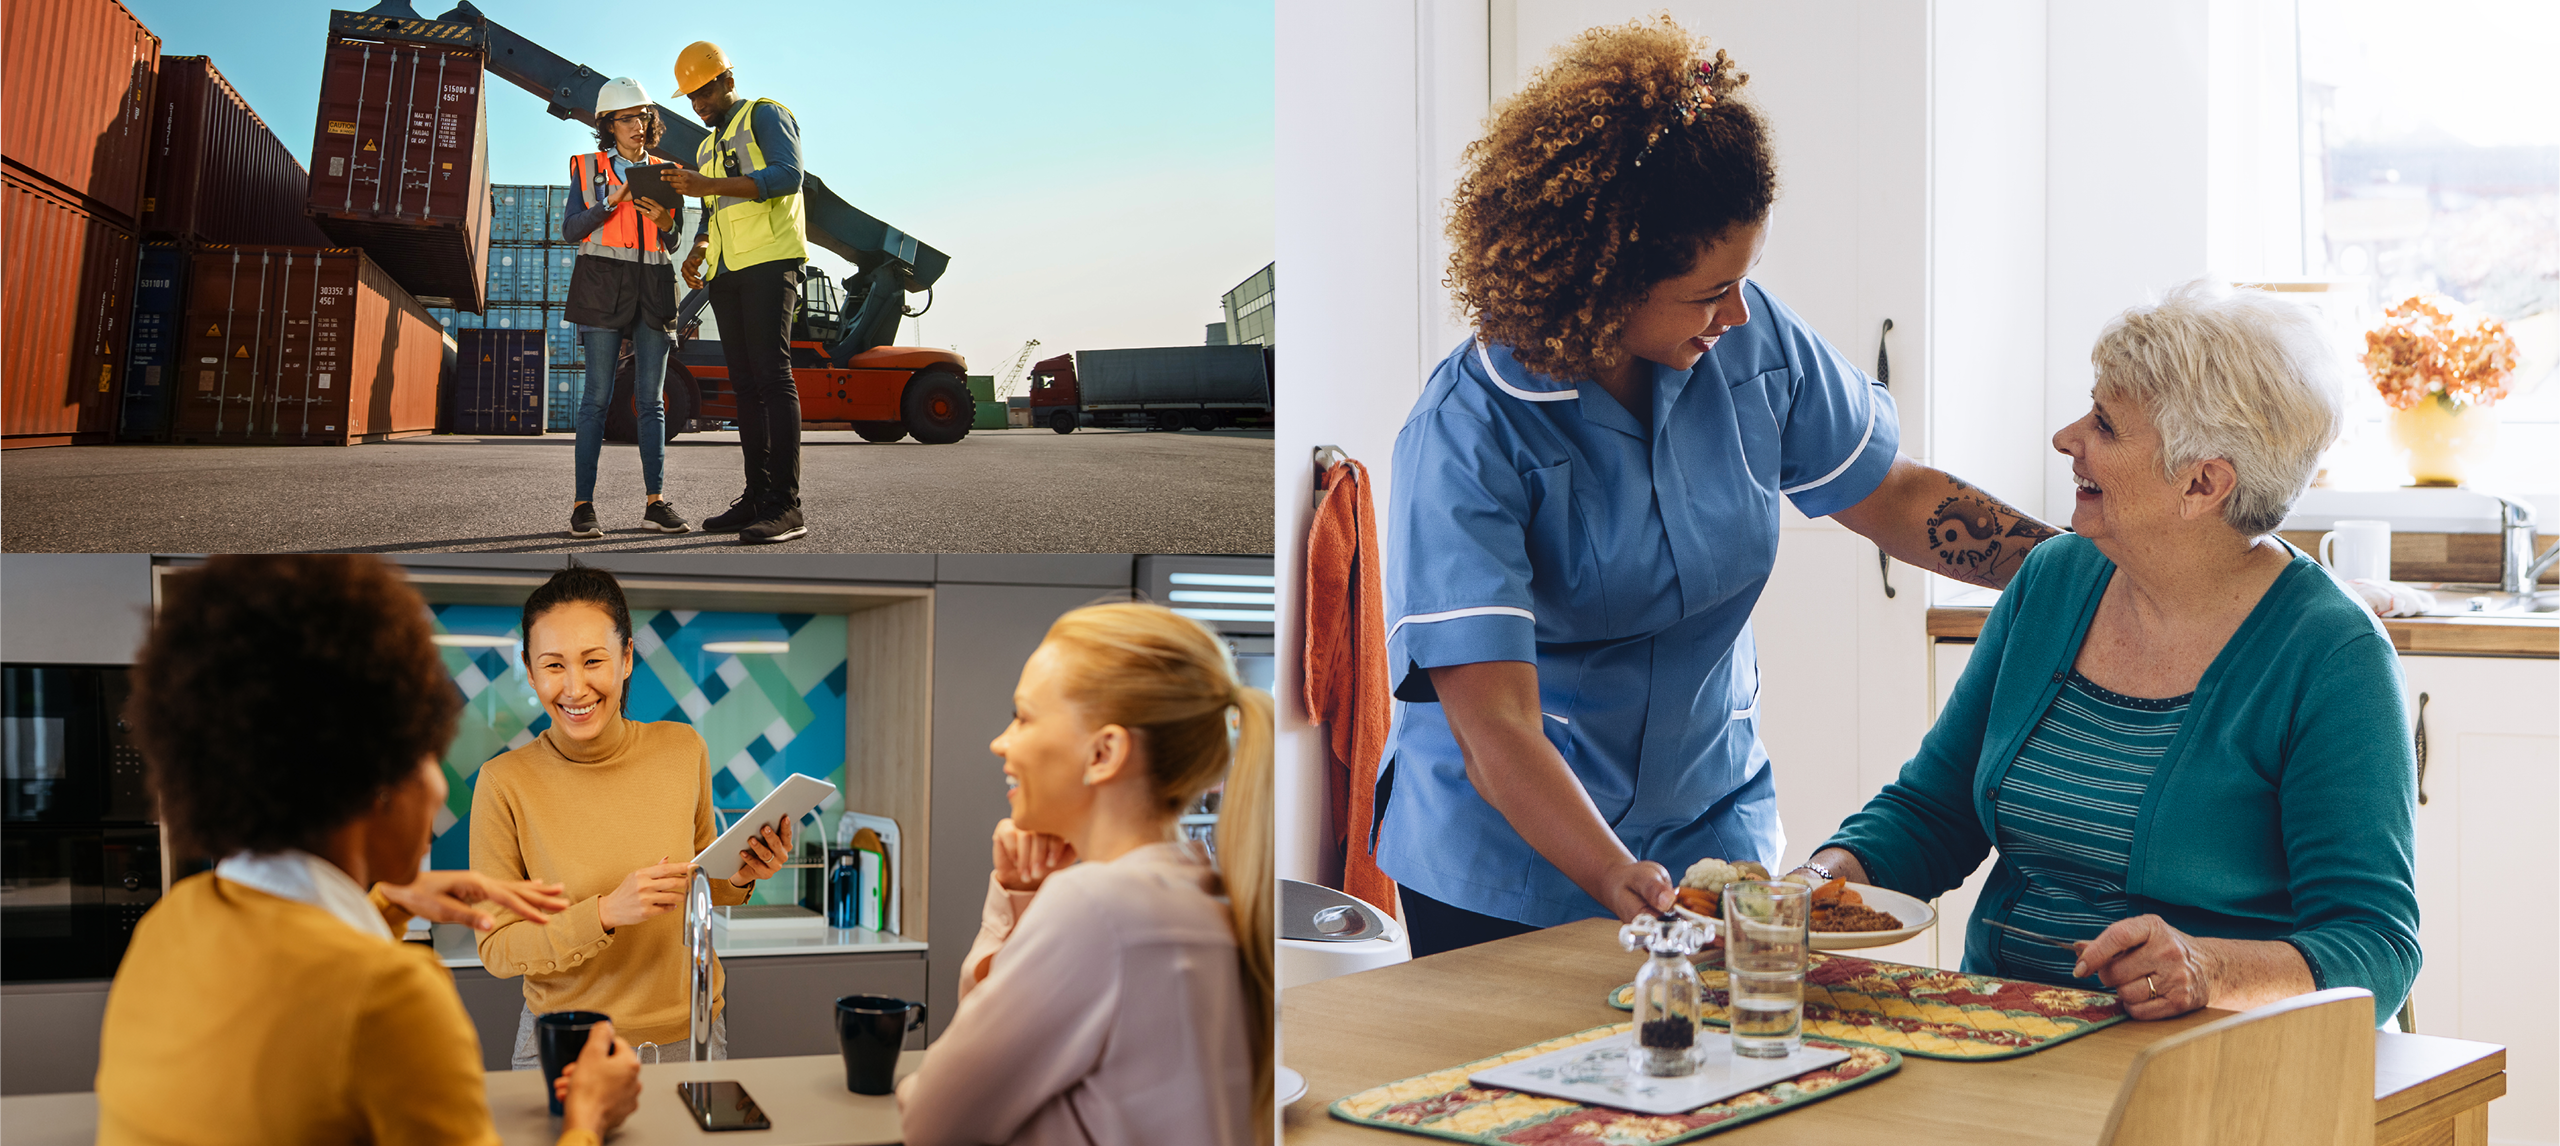 Collage of a man and woman in hard hats at a container yard, three women chatting in an office kitchen and a carer nurse looking after an older woman